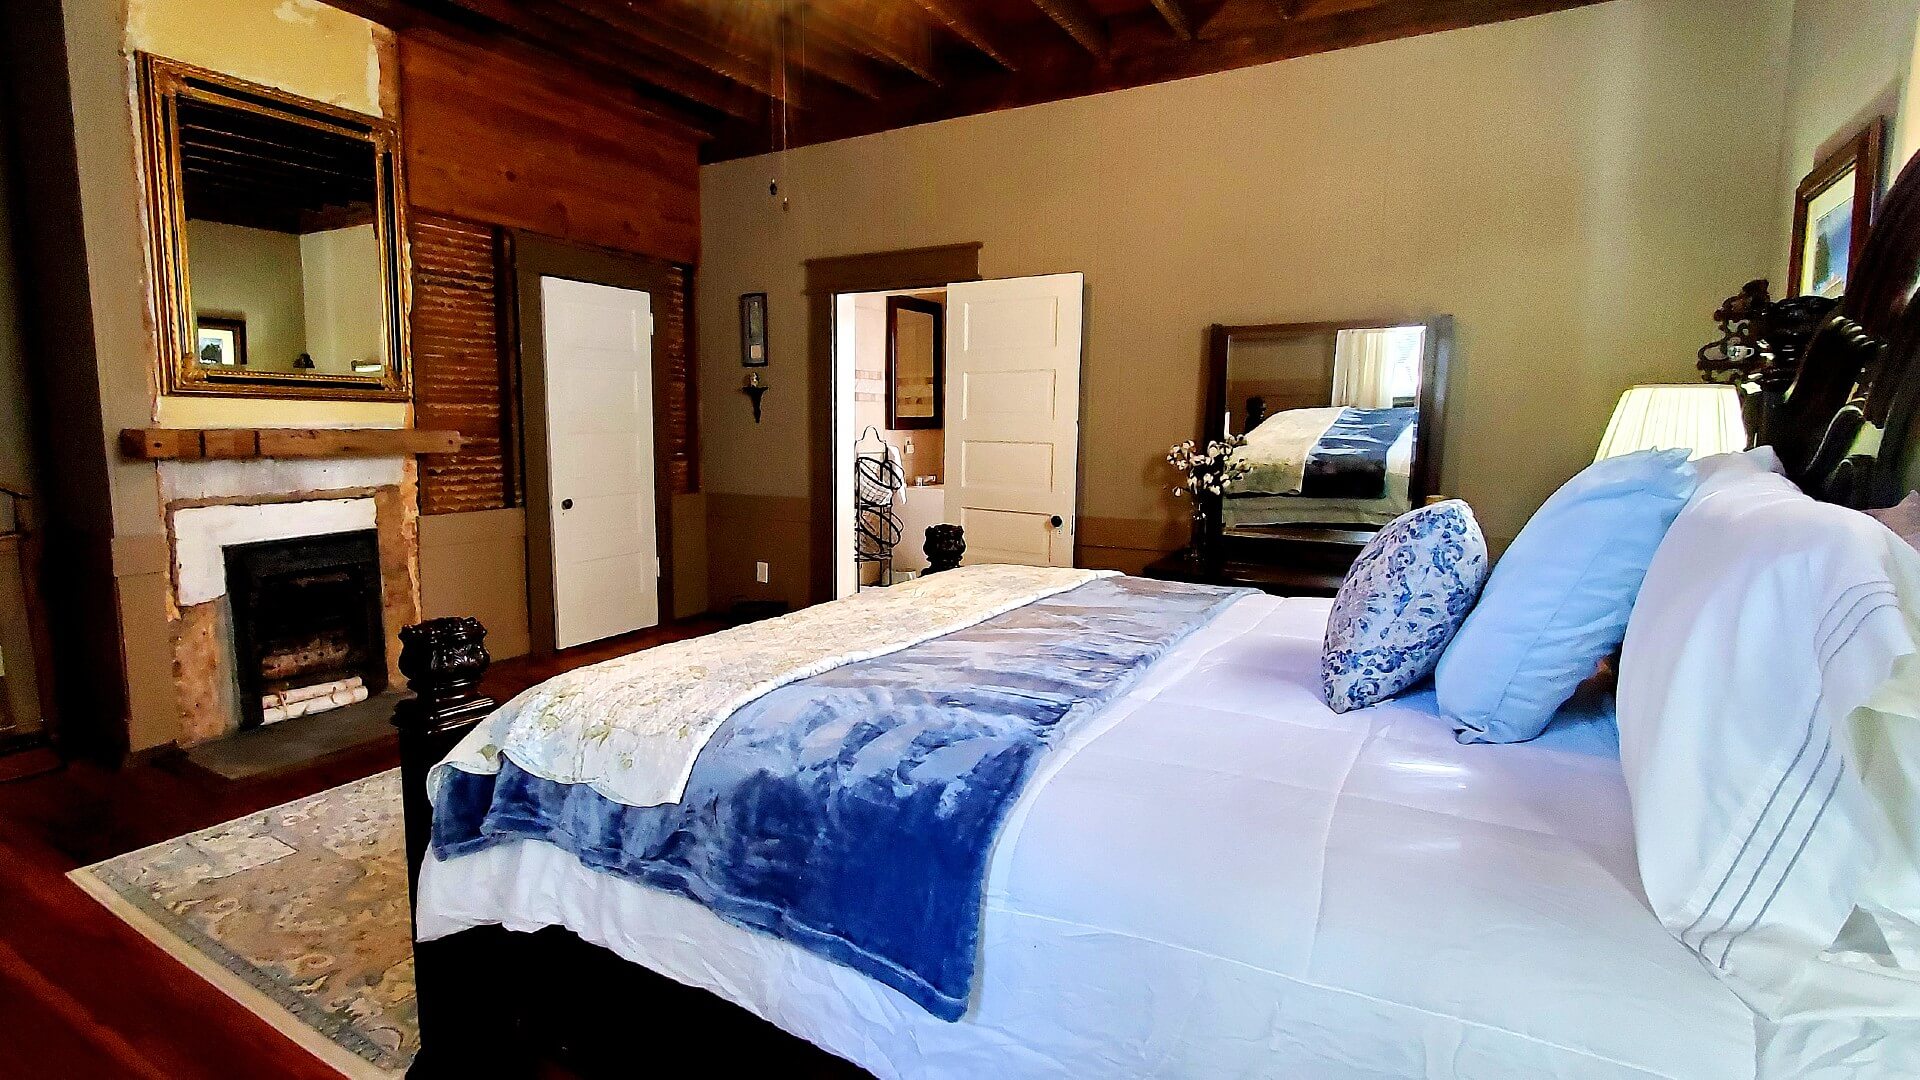 Spacious bedroom with queen bed in white and blue linens, fireplace and doorway into a bathroom